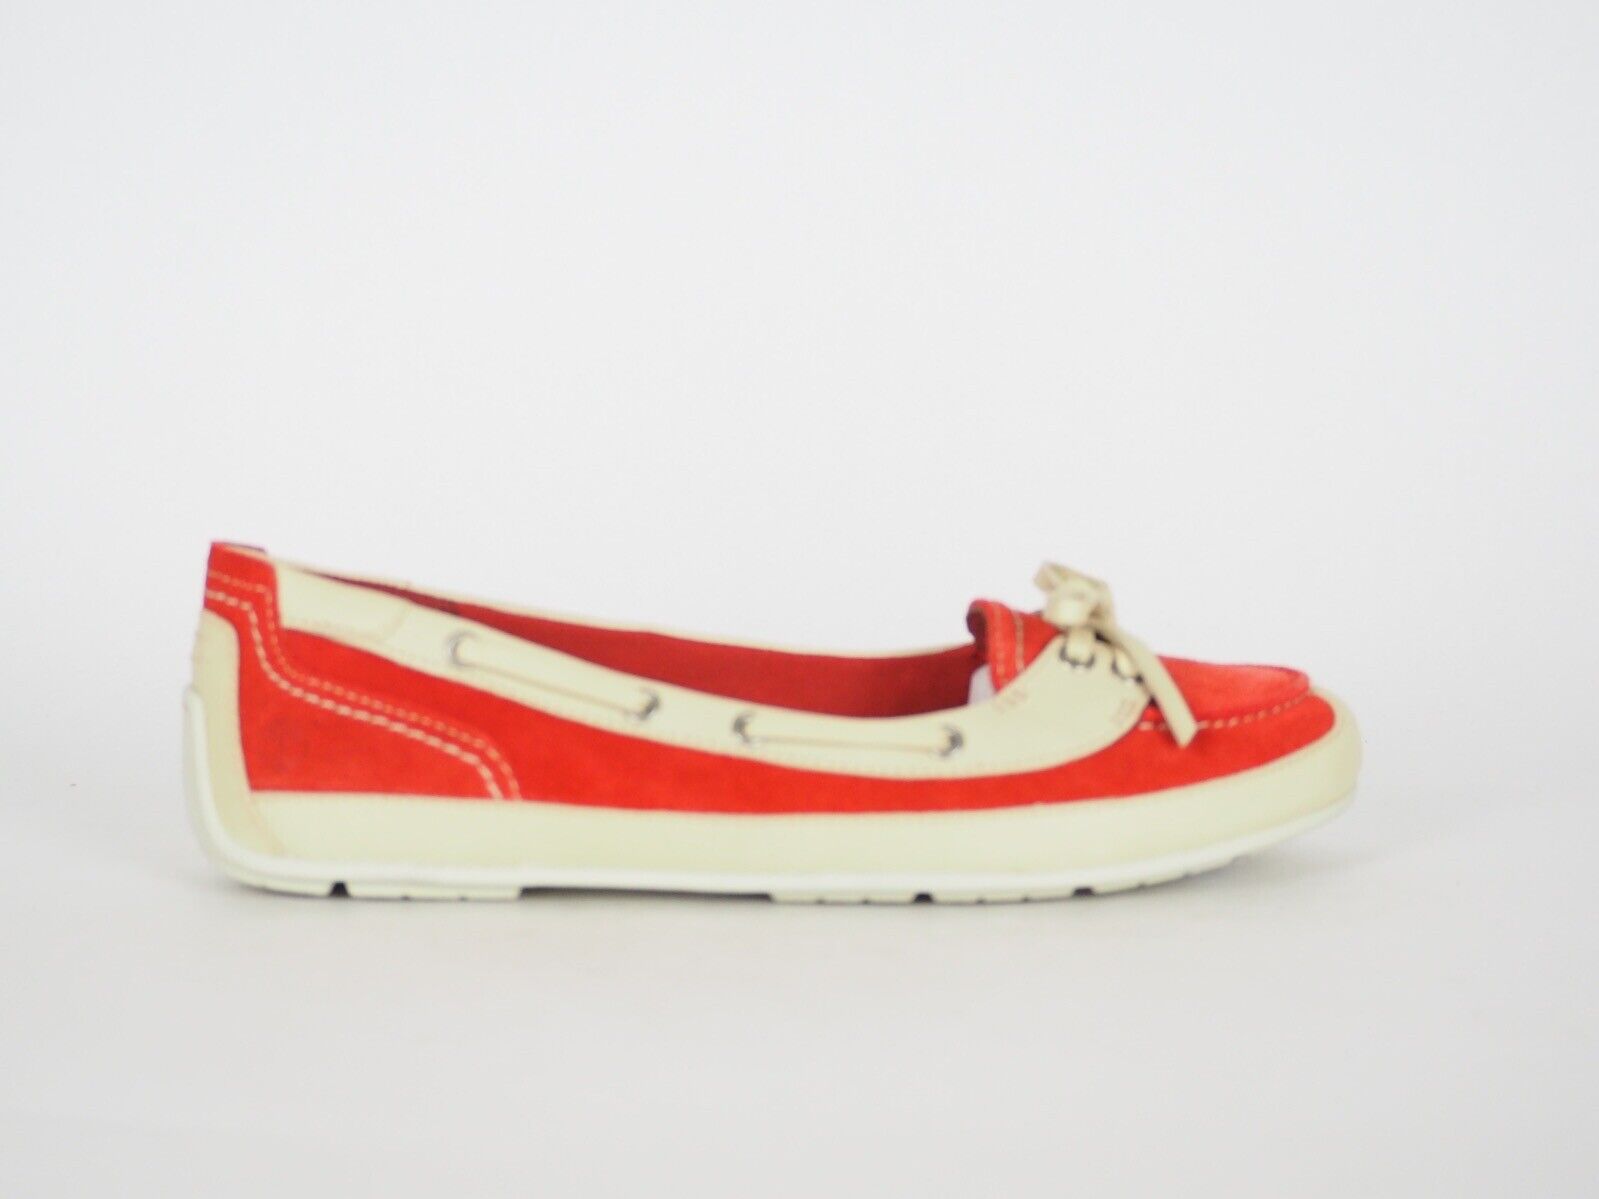 Womens Timberland EK Boothbay 3912R Red Suede Leather Slip On Boat Shoes - London Top Style